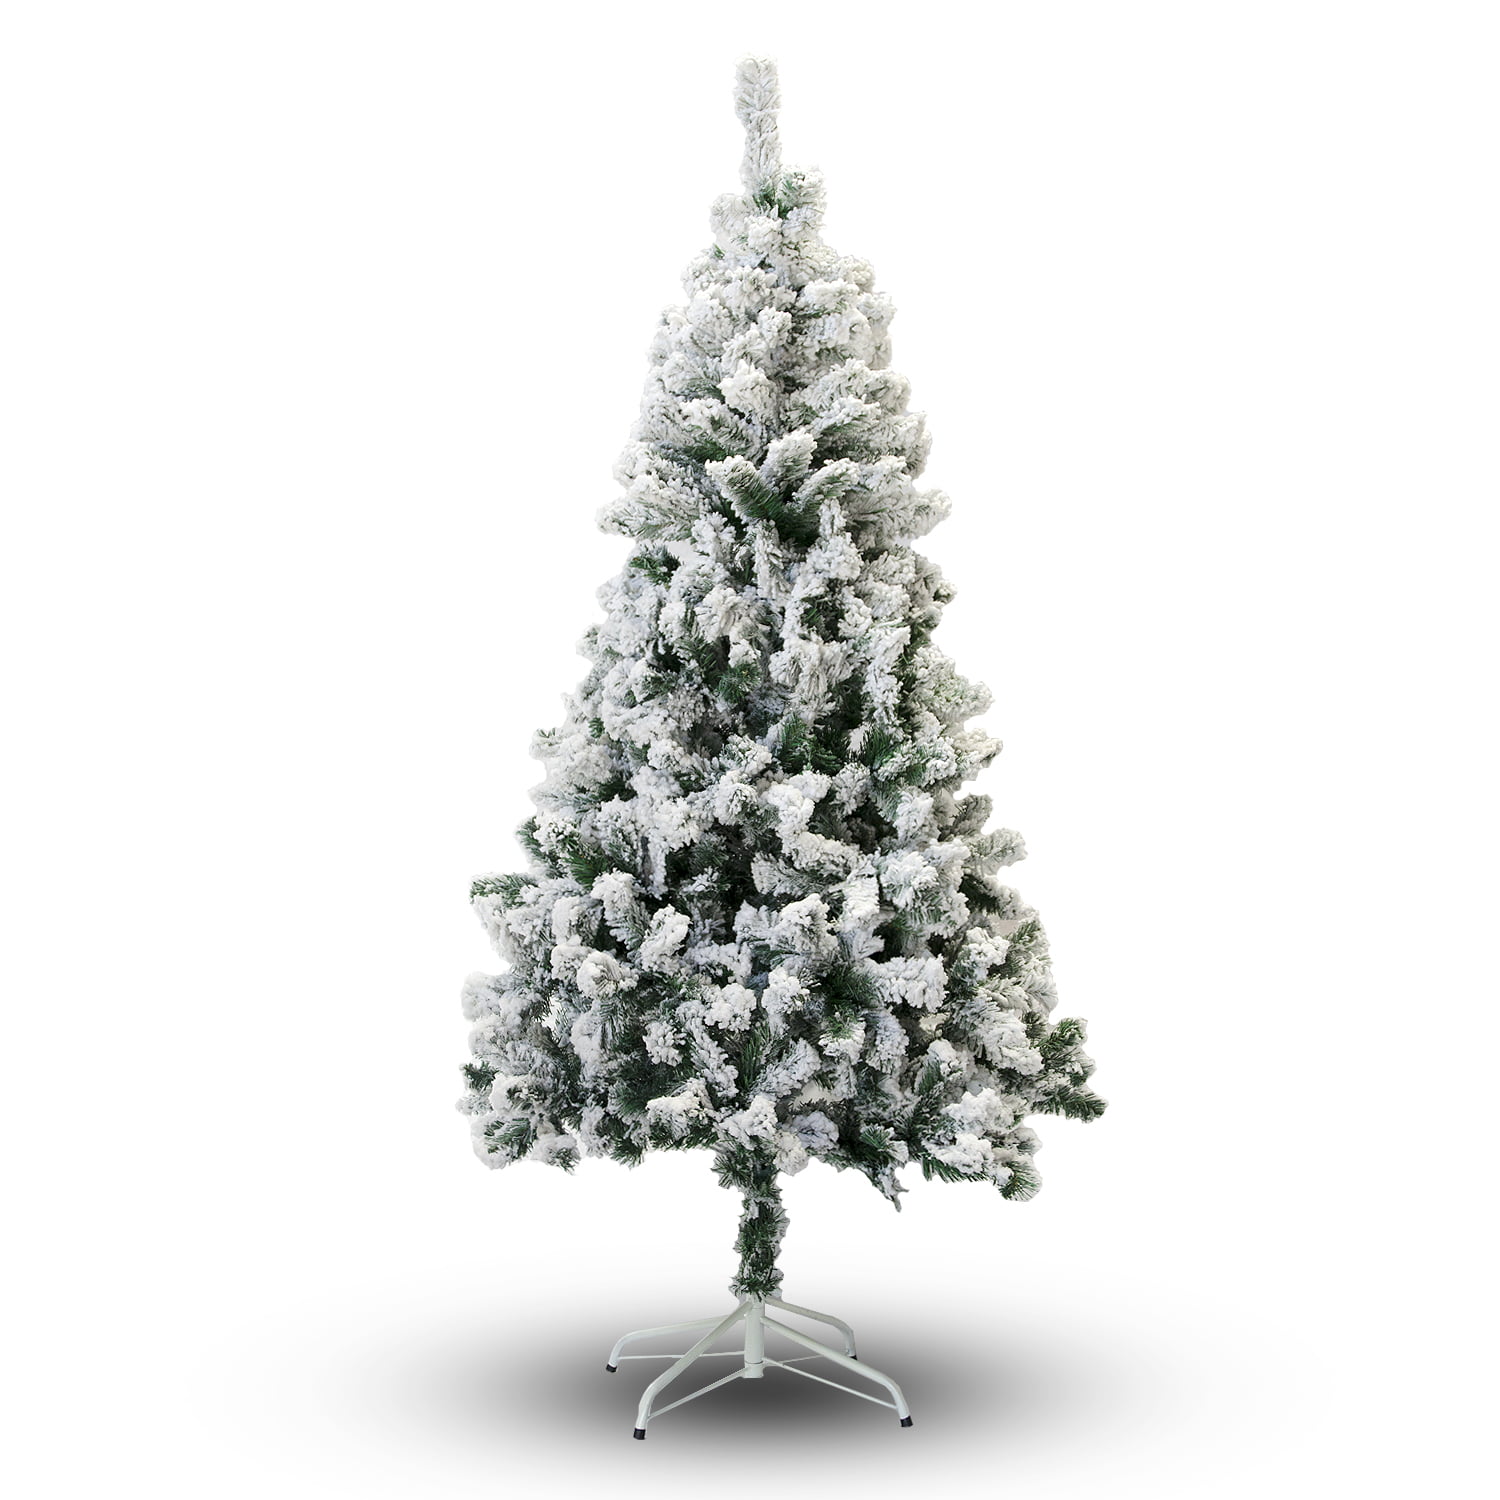 Xmas Full Tree for Indoor and Outdoor 6ft/Snow Super Holiday 6ft Snow Flocked Hinged Artificial Pine Christmas Tree with Solid Metal Stand